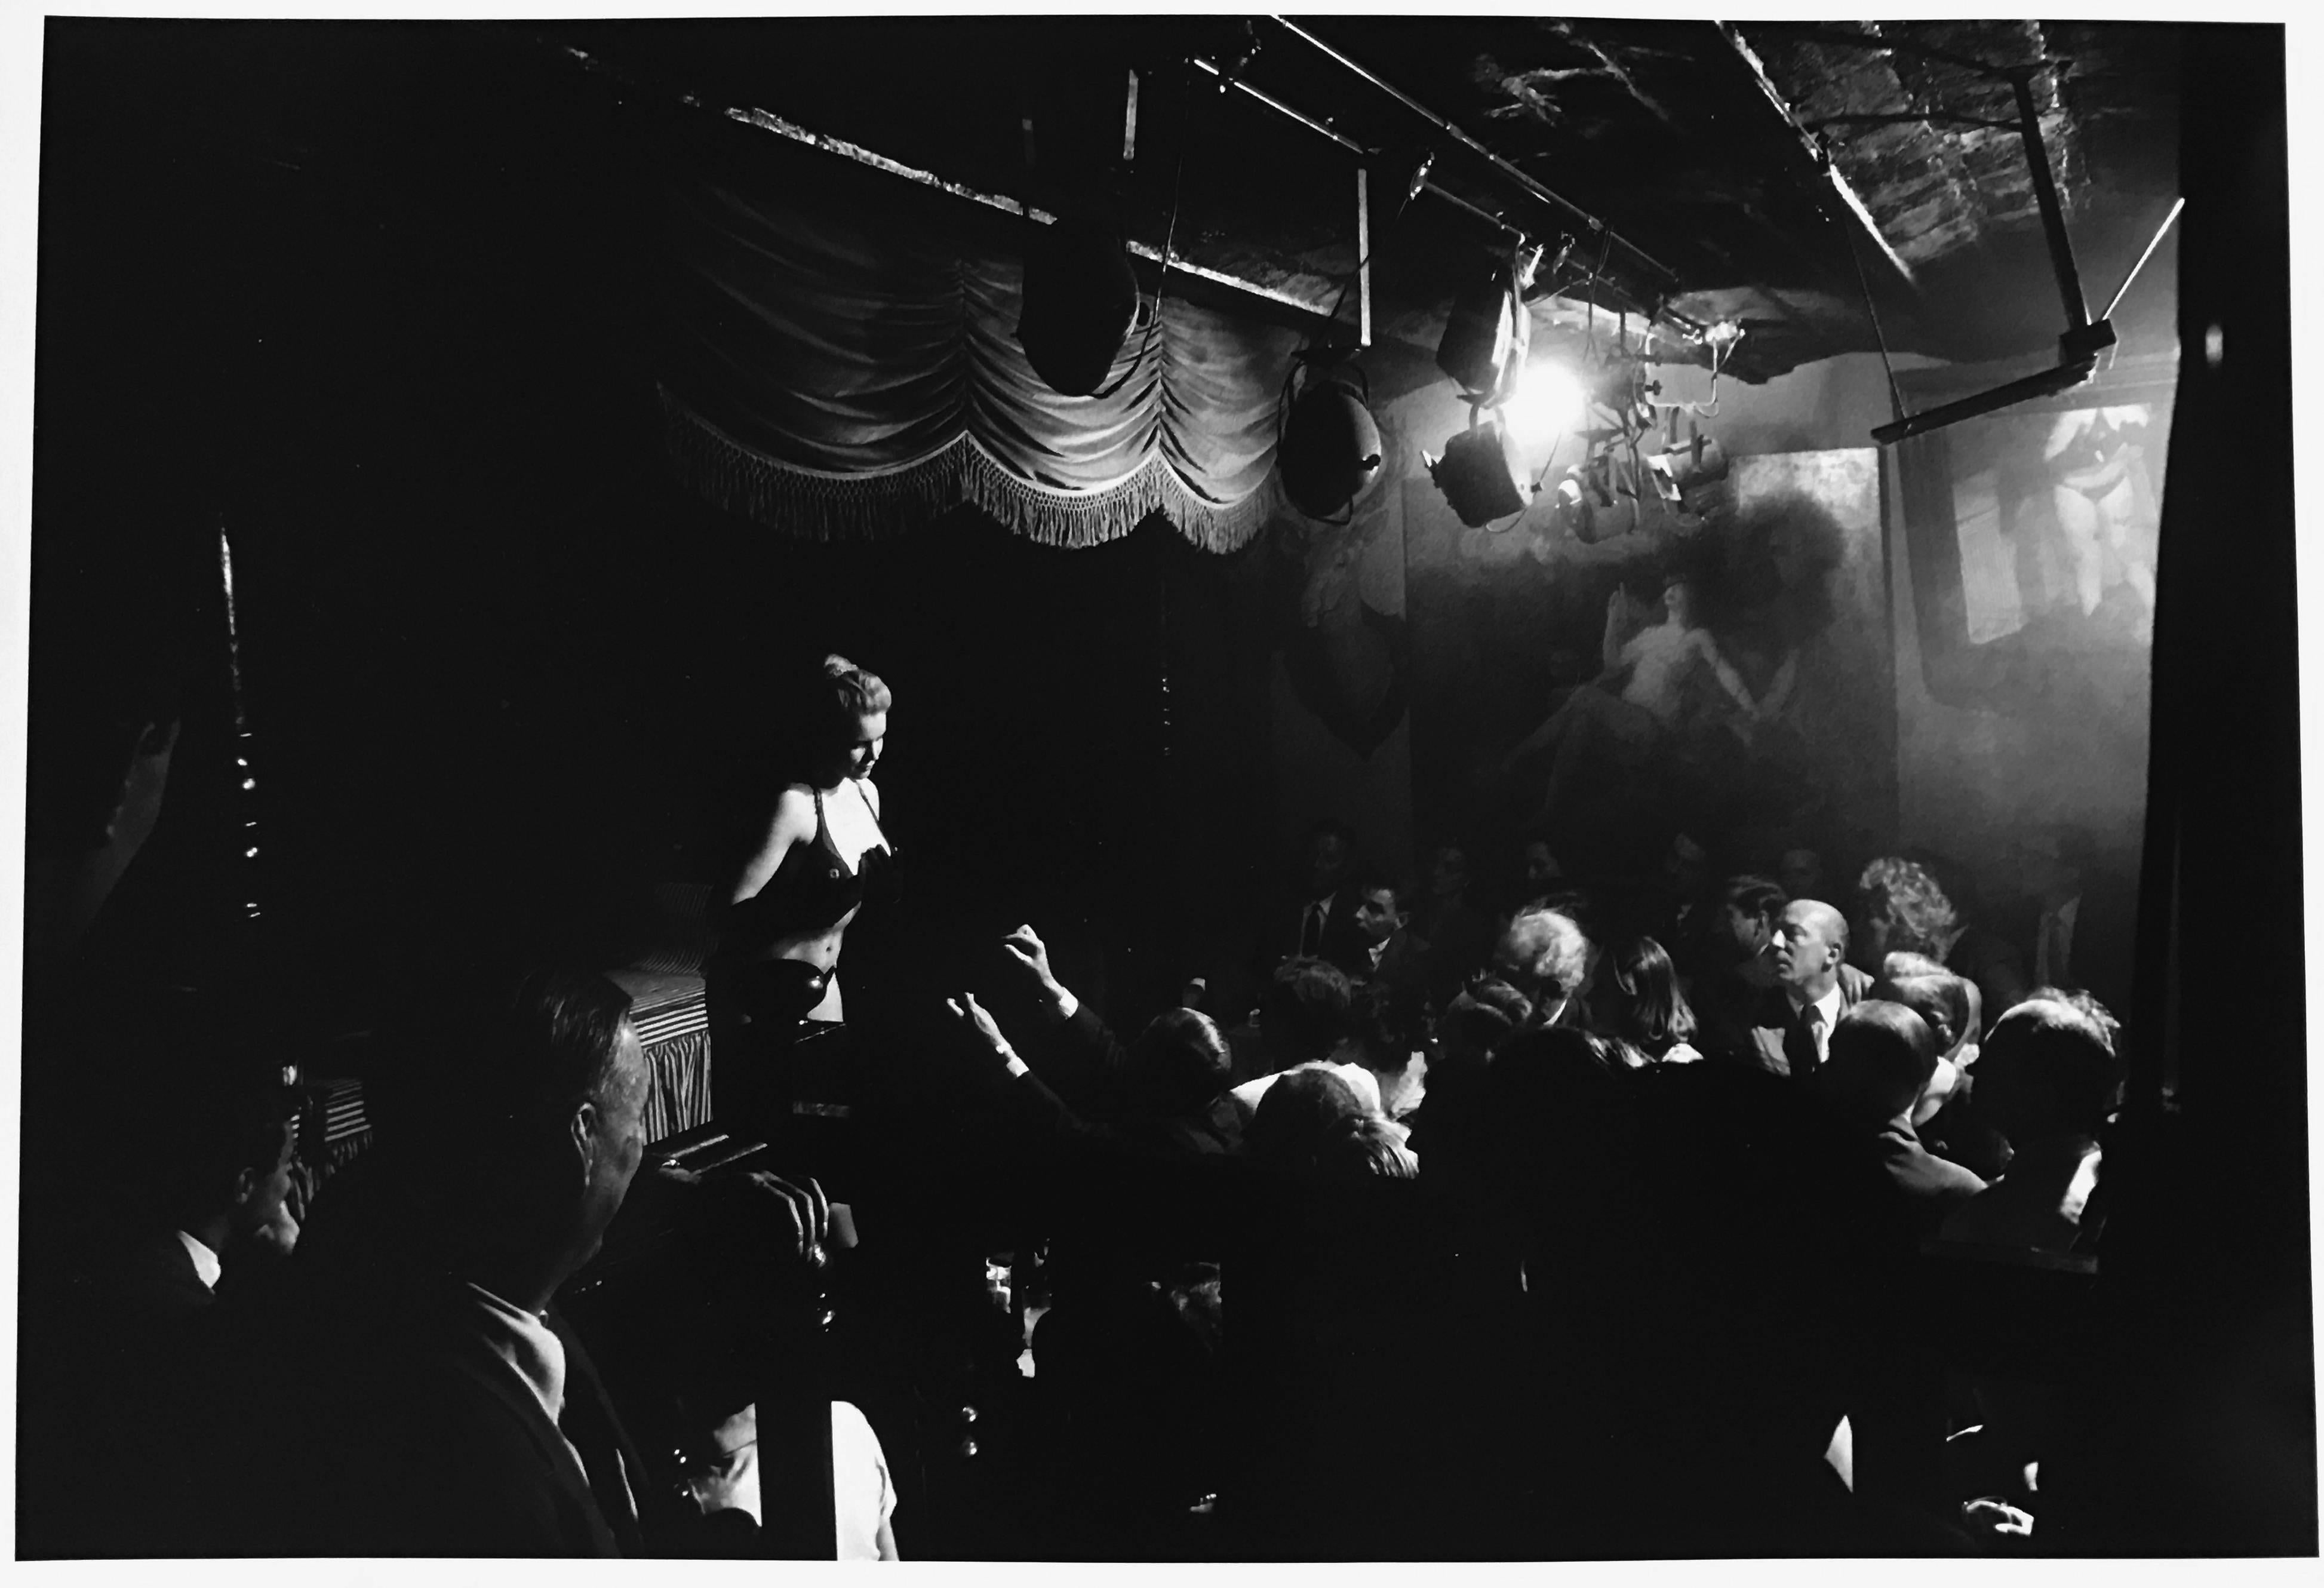 Stripper Crazy Horse, Paris France, Black and White Photography Night Life 1950s